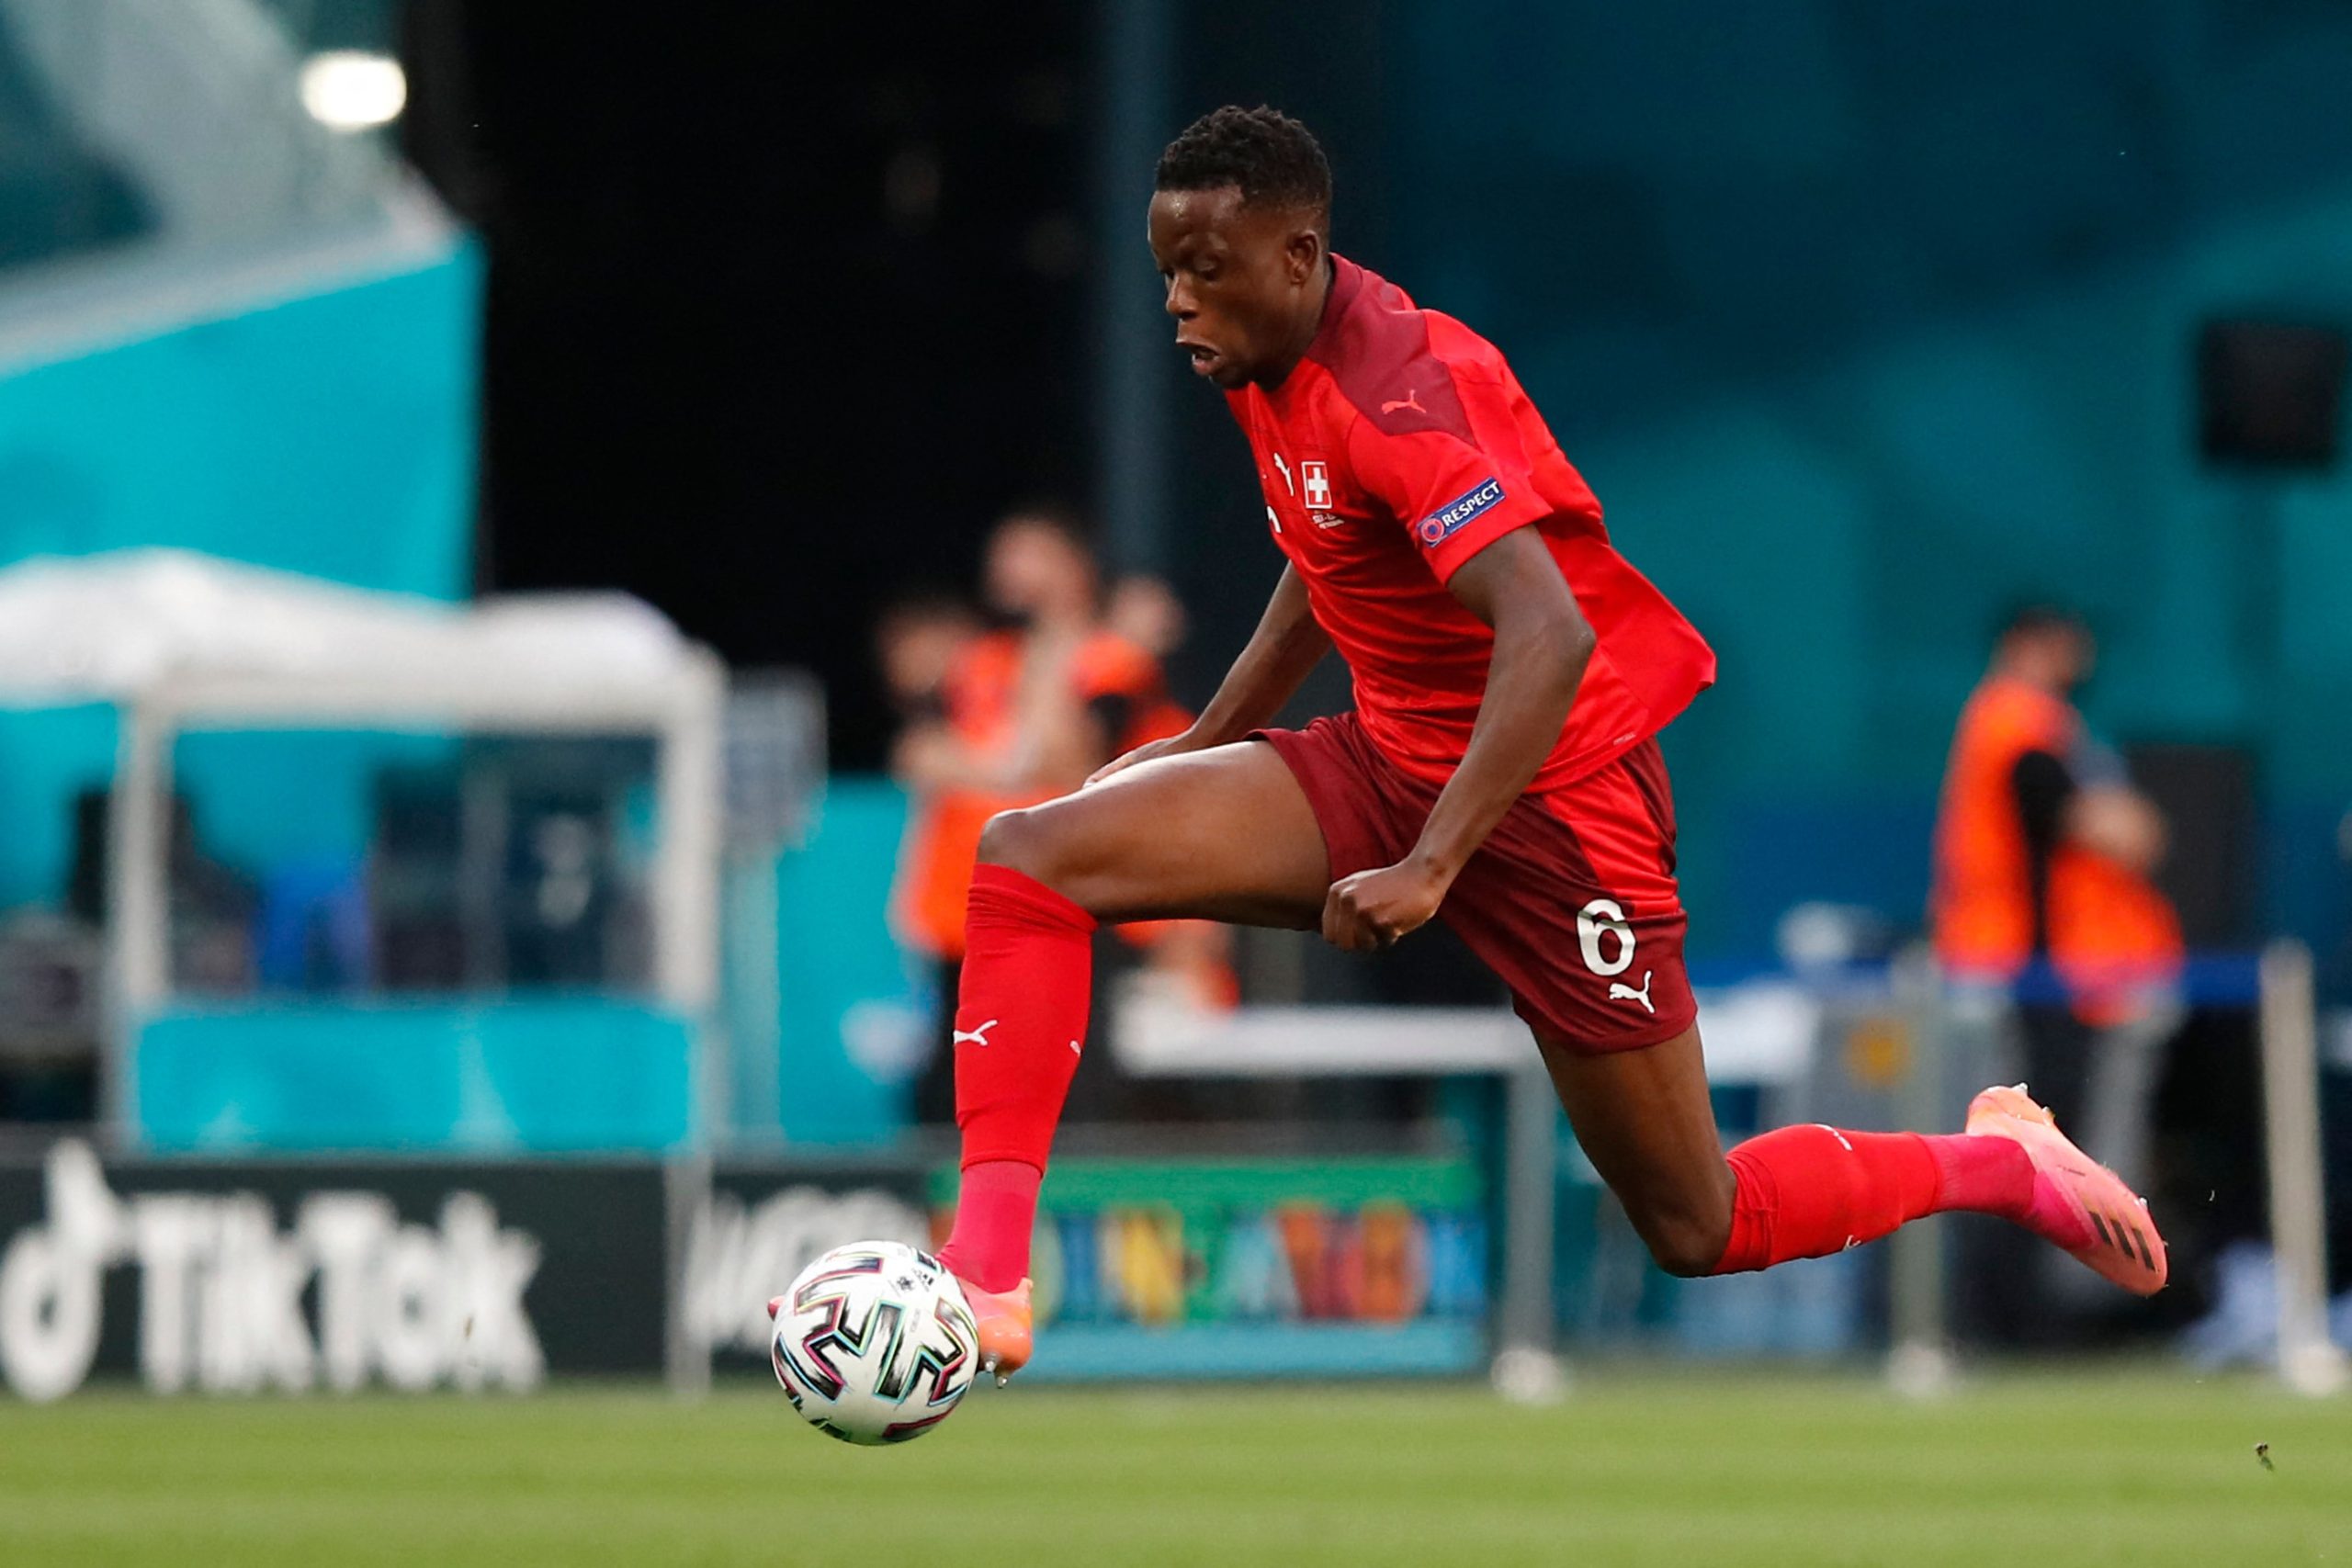 Denis Zakaria runs with the ball during the UEFA EURO 2020 quarter-final match between Switzerland and Spain.